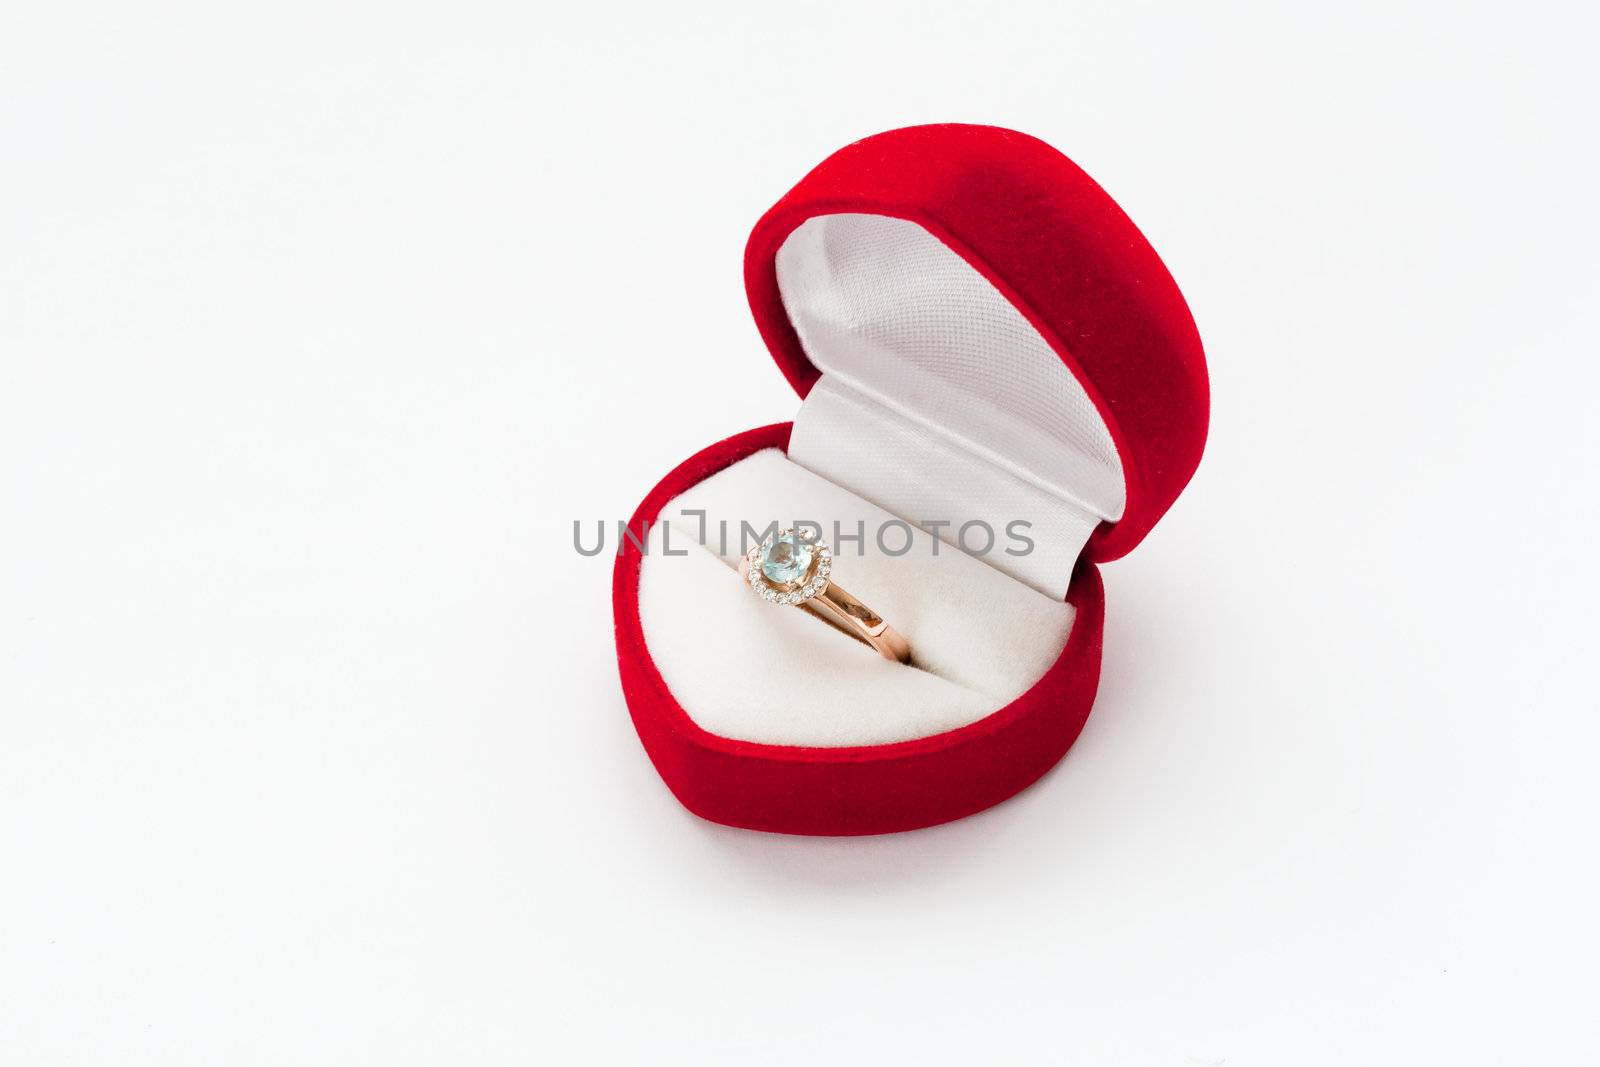 Gold ring with diamond in Red box